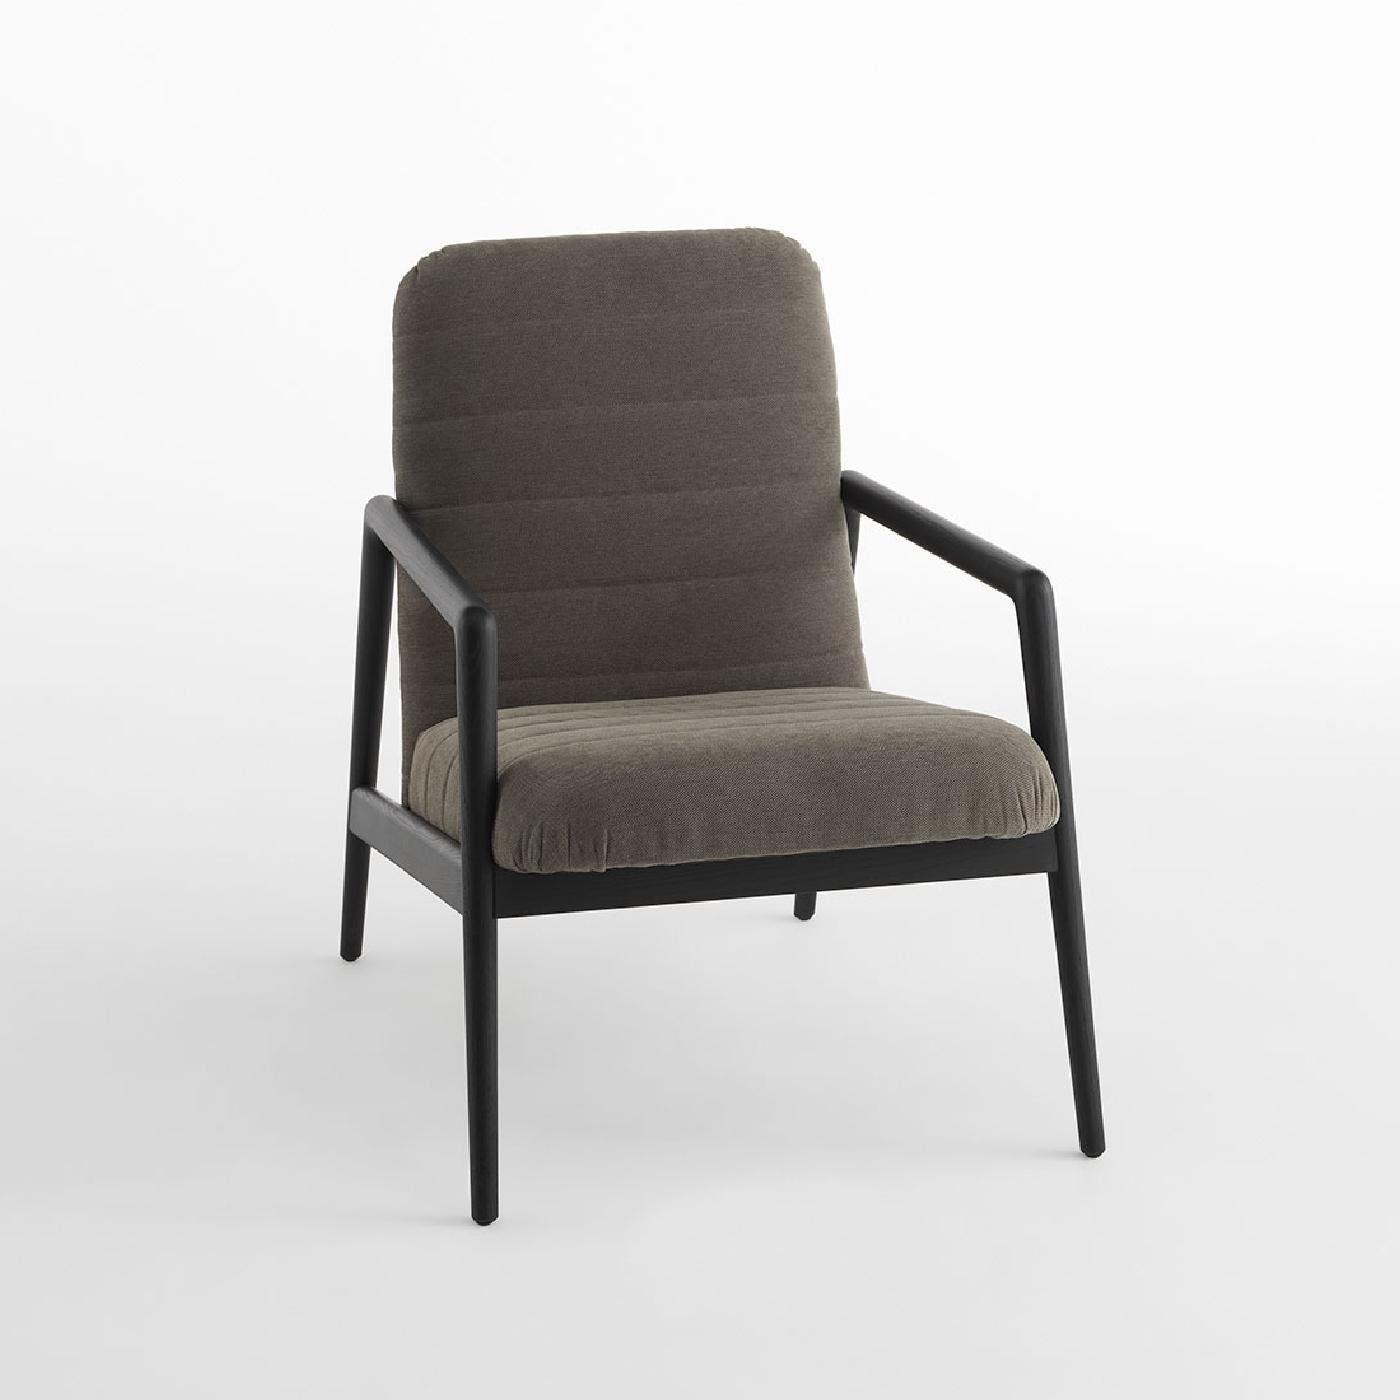 A Nordic inspiration and an elegant, Minimalist design characterize this superb armchair by Studio Balutto. Sophisticated and ergonomic, it boasts a timeless allure marked by a solid ash frame with a matte black finish. The plywood internal